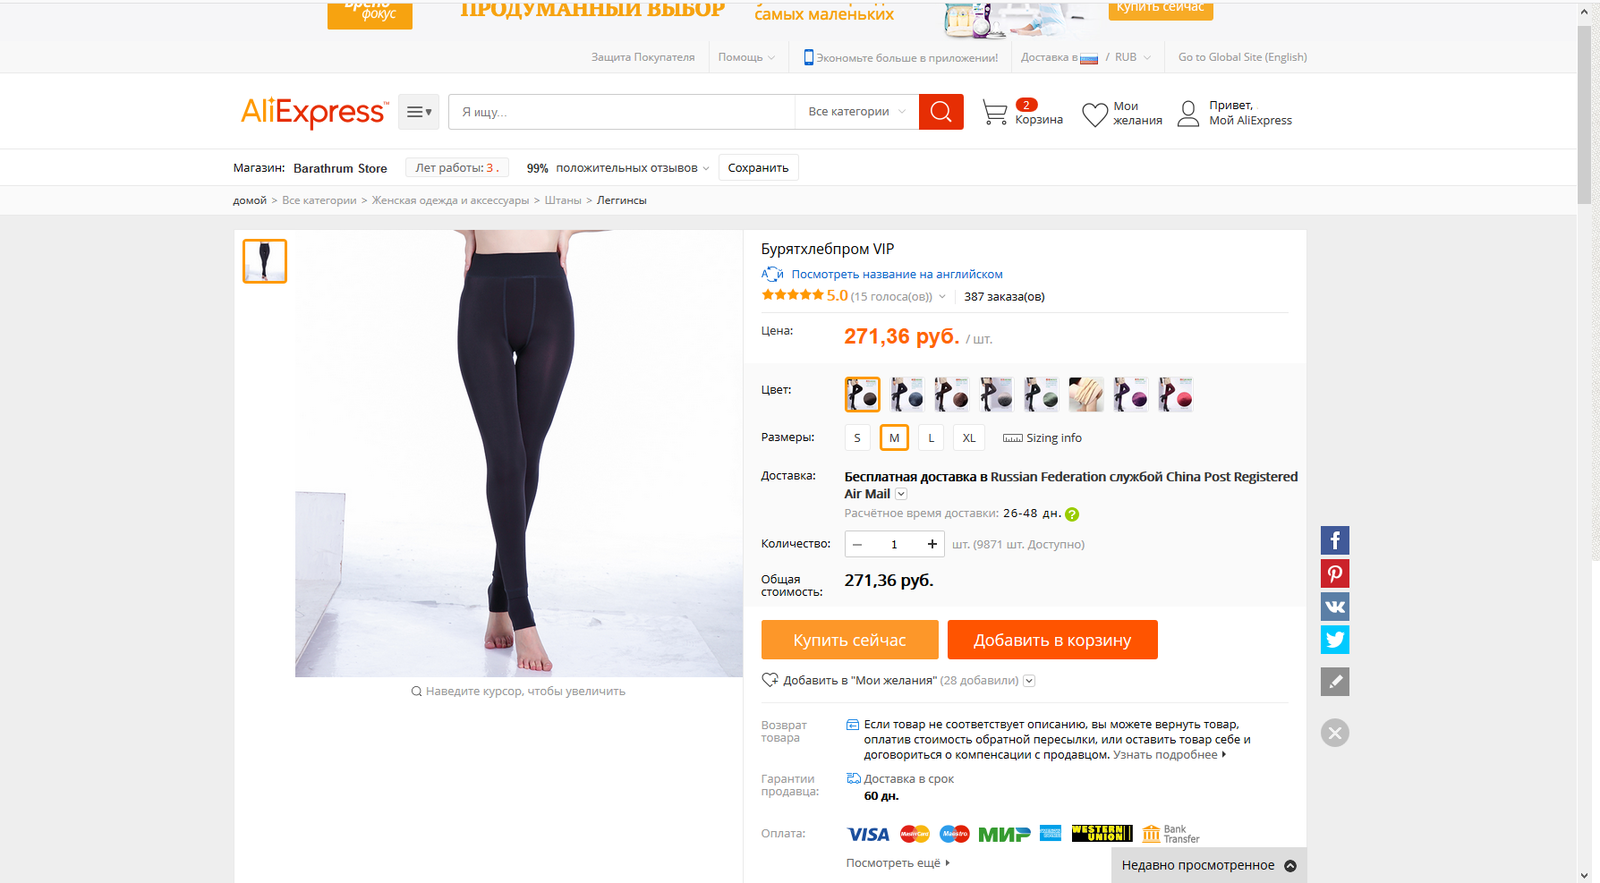 Aliexpress, the best name - AliExpress, Lost in translation, Unclear